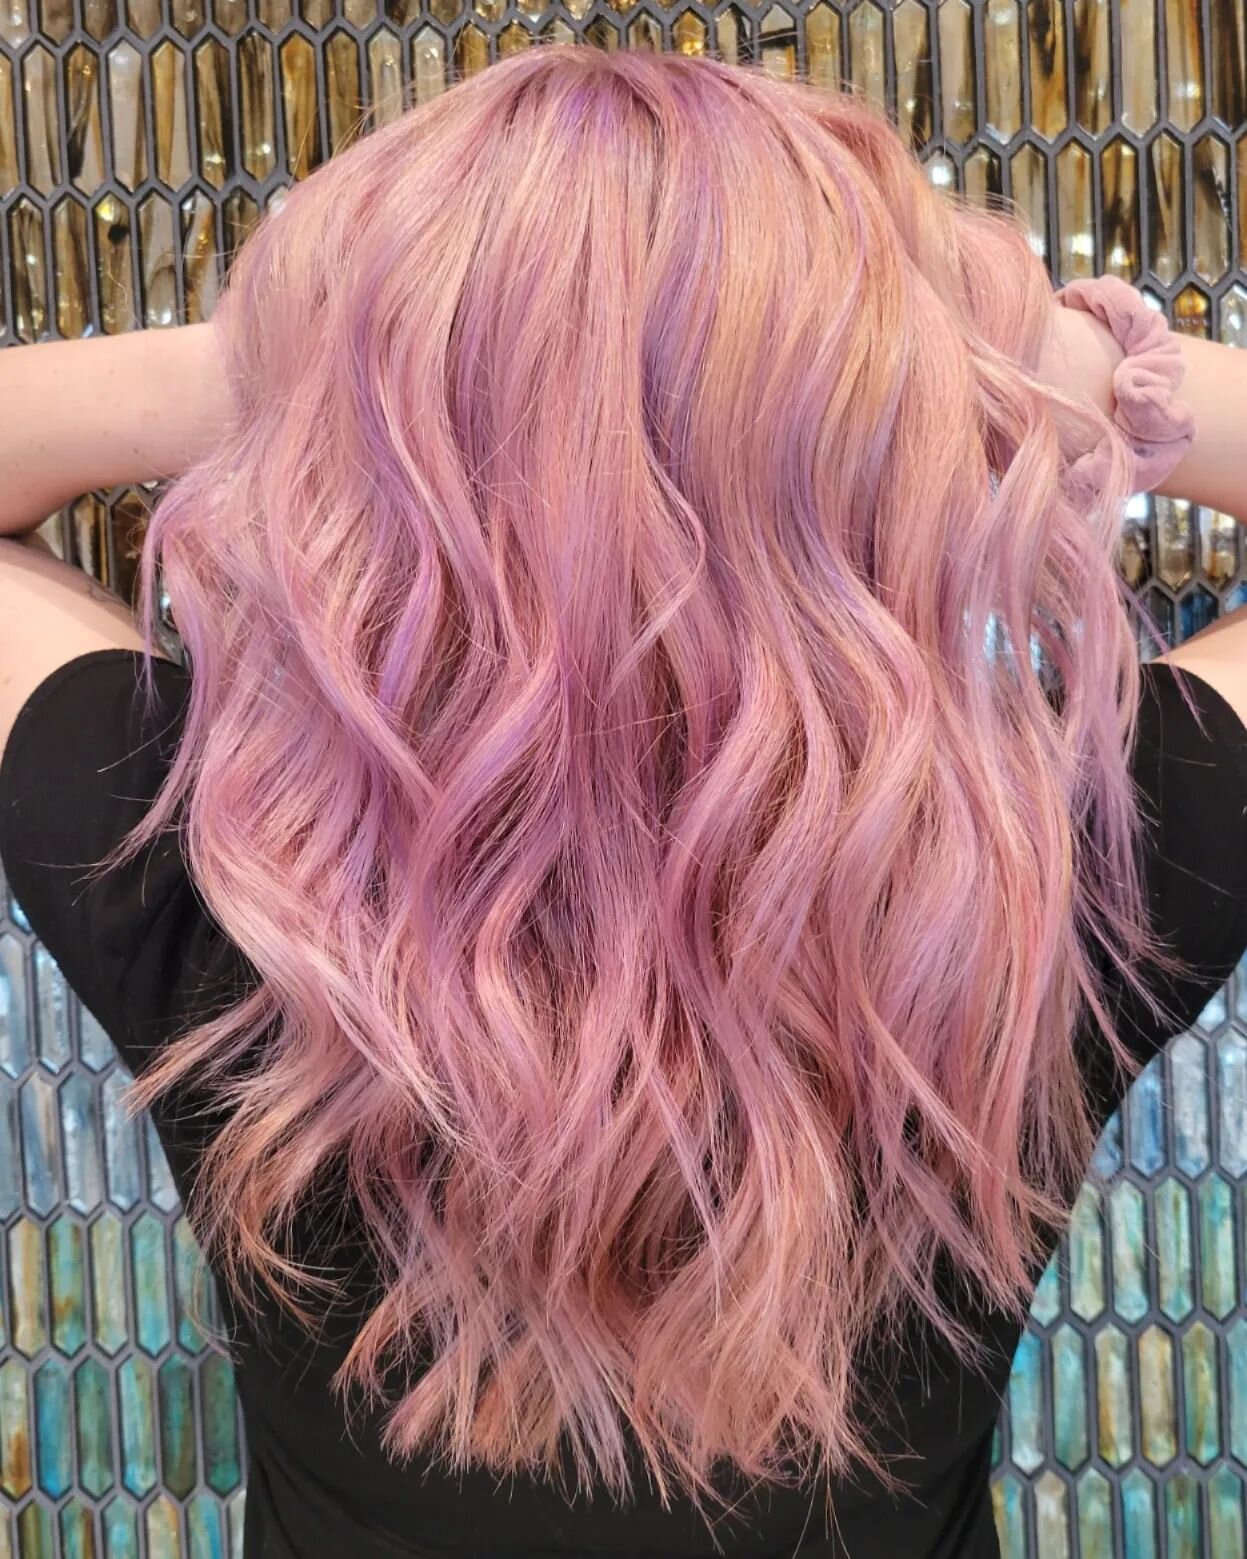 Because SPRING!!! That's Why!!!💕🌷🐰🌤🍨🦋
&deg;
Fresh Baby Pink and Lilac hair for this Beautiful Lady! 
&deg;
Book Your Spring Hair appointment! Text me!!
720-839-3465 
&deg;
&deg;

#allshadesarebeautiful 
#realpeople #itsfunbeingfun #chicksthatro